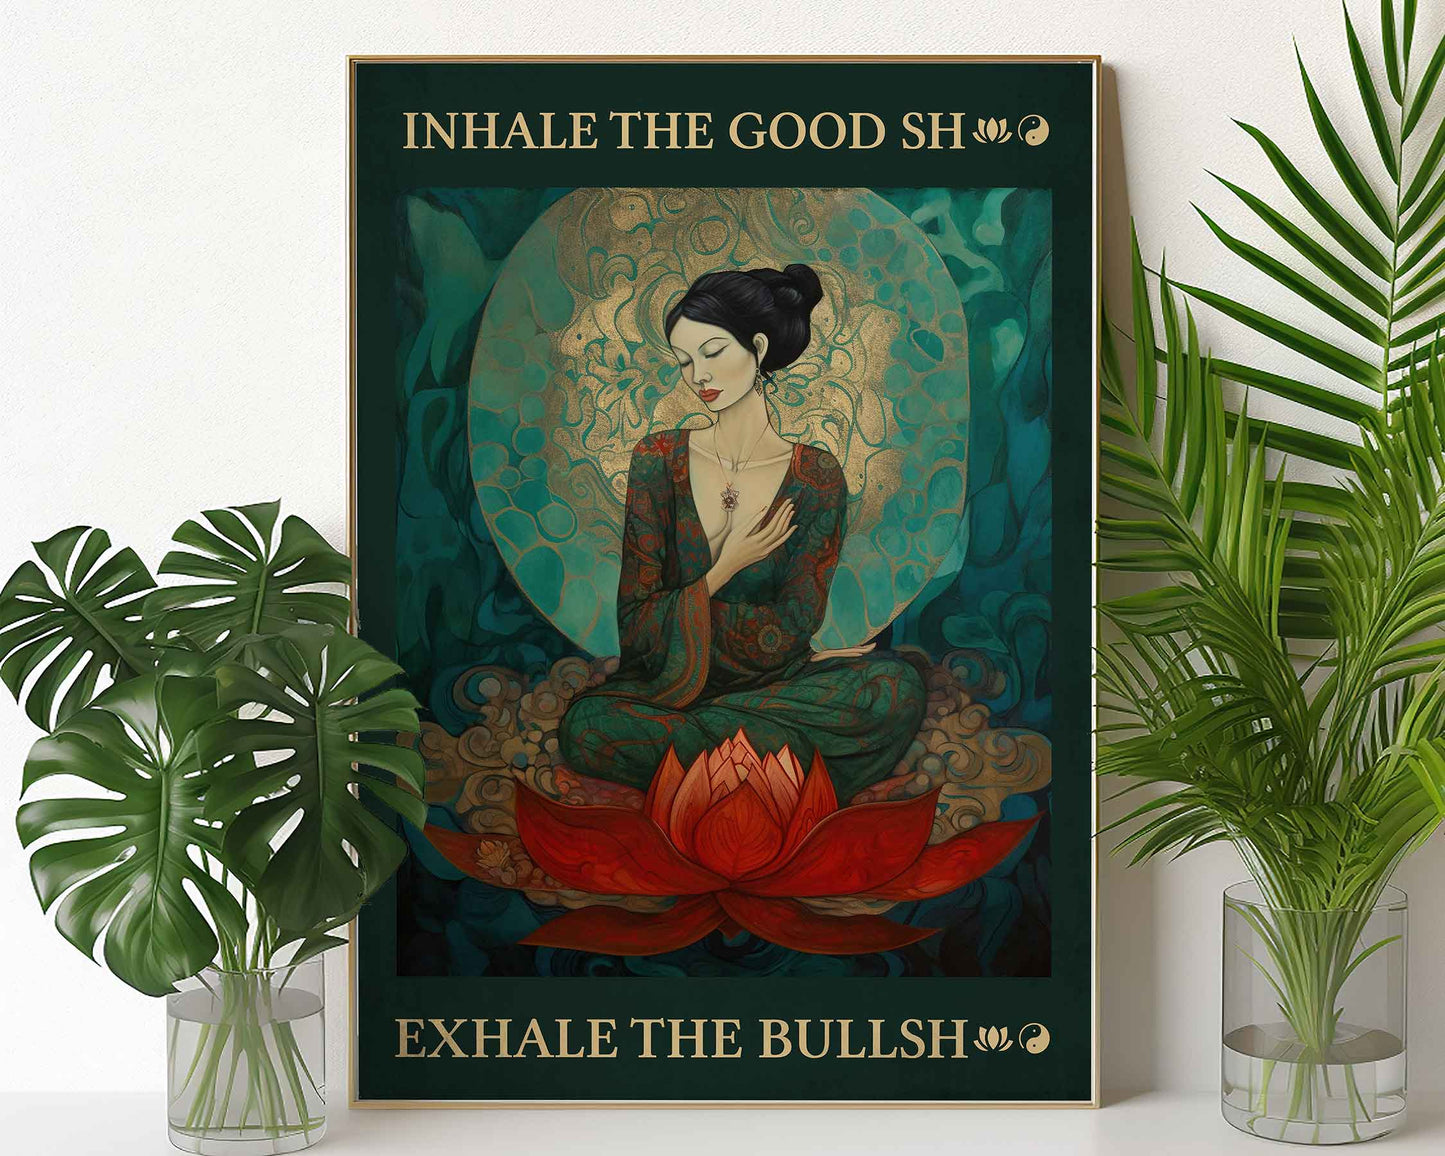 Framed Image of Inhale The Good Exhale The Bull Vintage Famous Quote Art Print Green